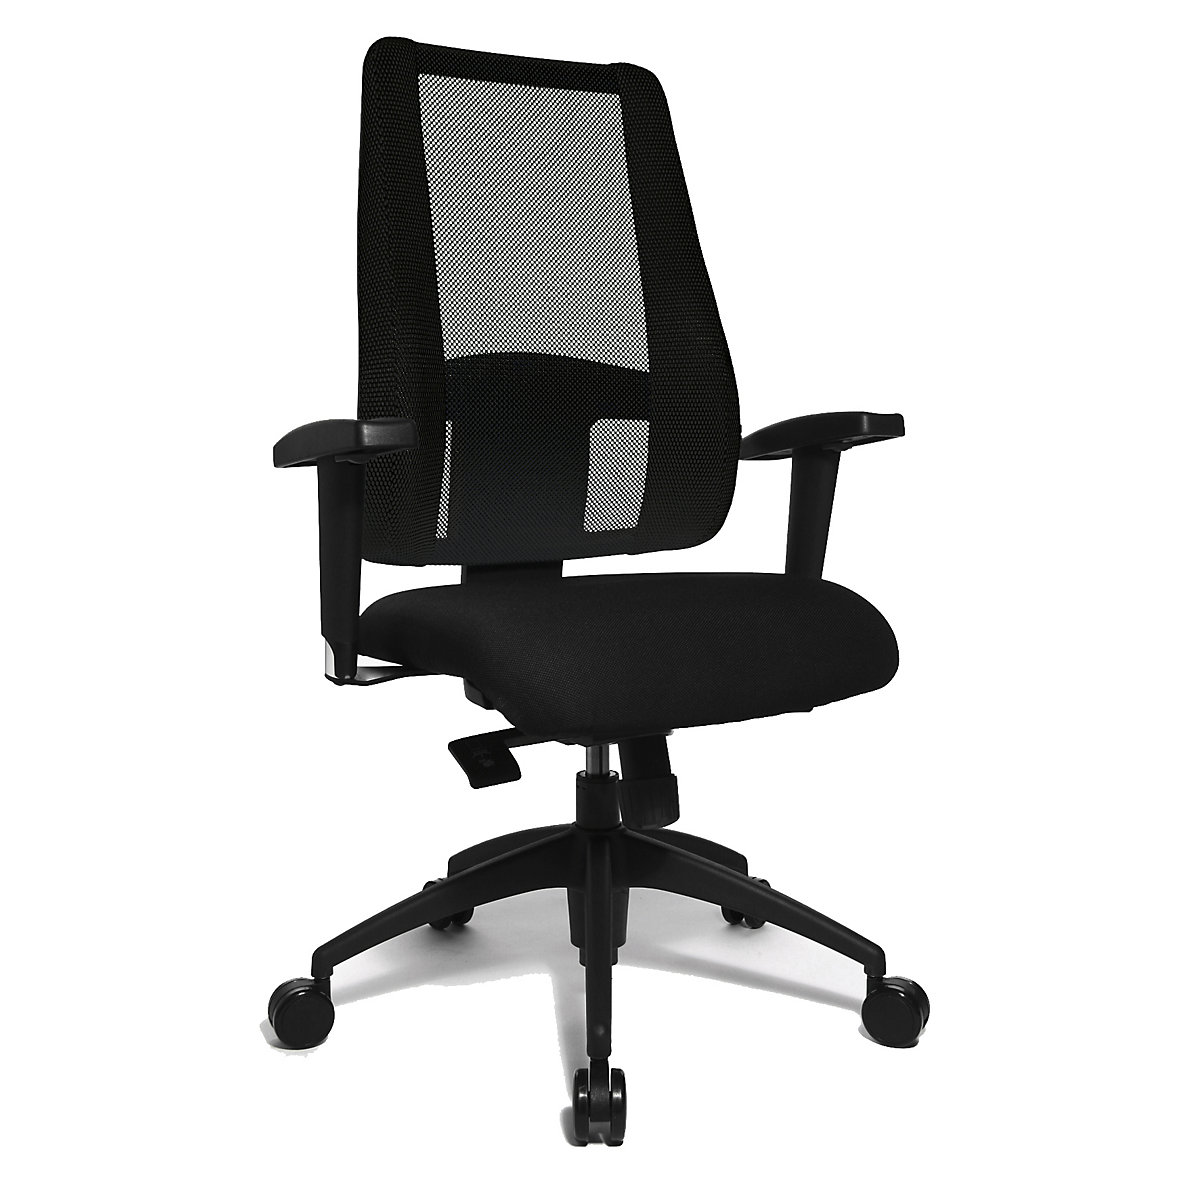 LADY SITNESS DELUXE office swivel chair - Topstar